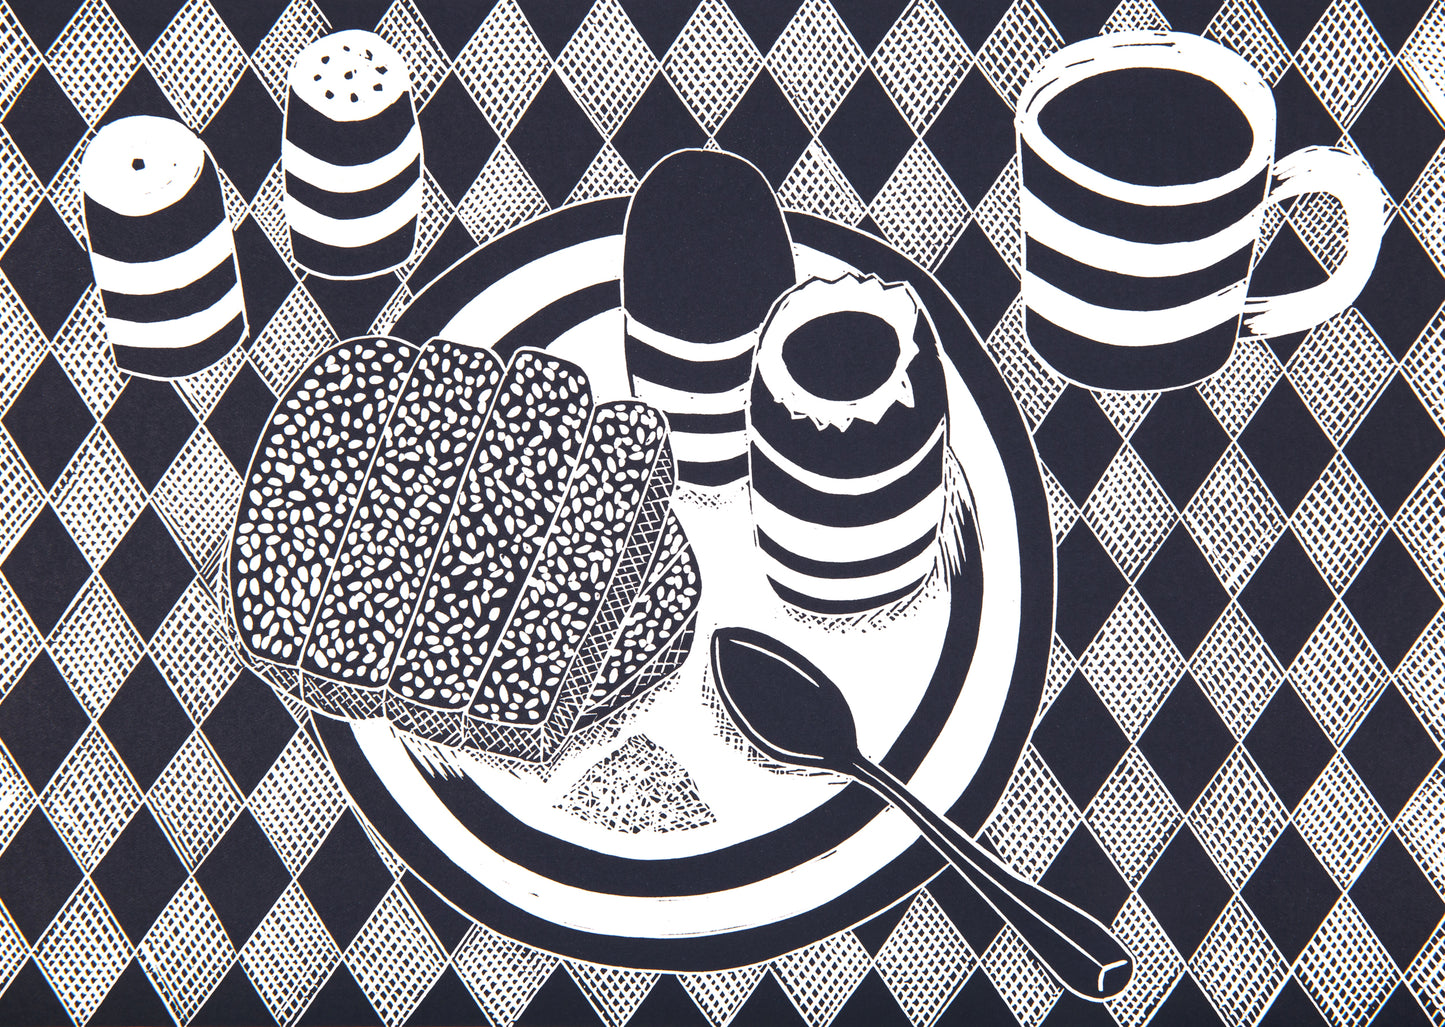 Boiled Eggs and Soldiers on Cornishware Plate Lino Print